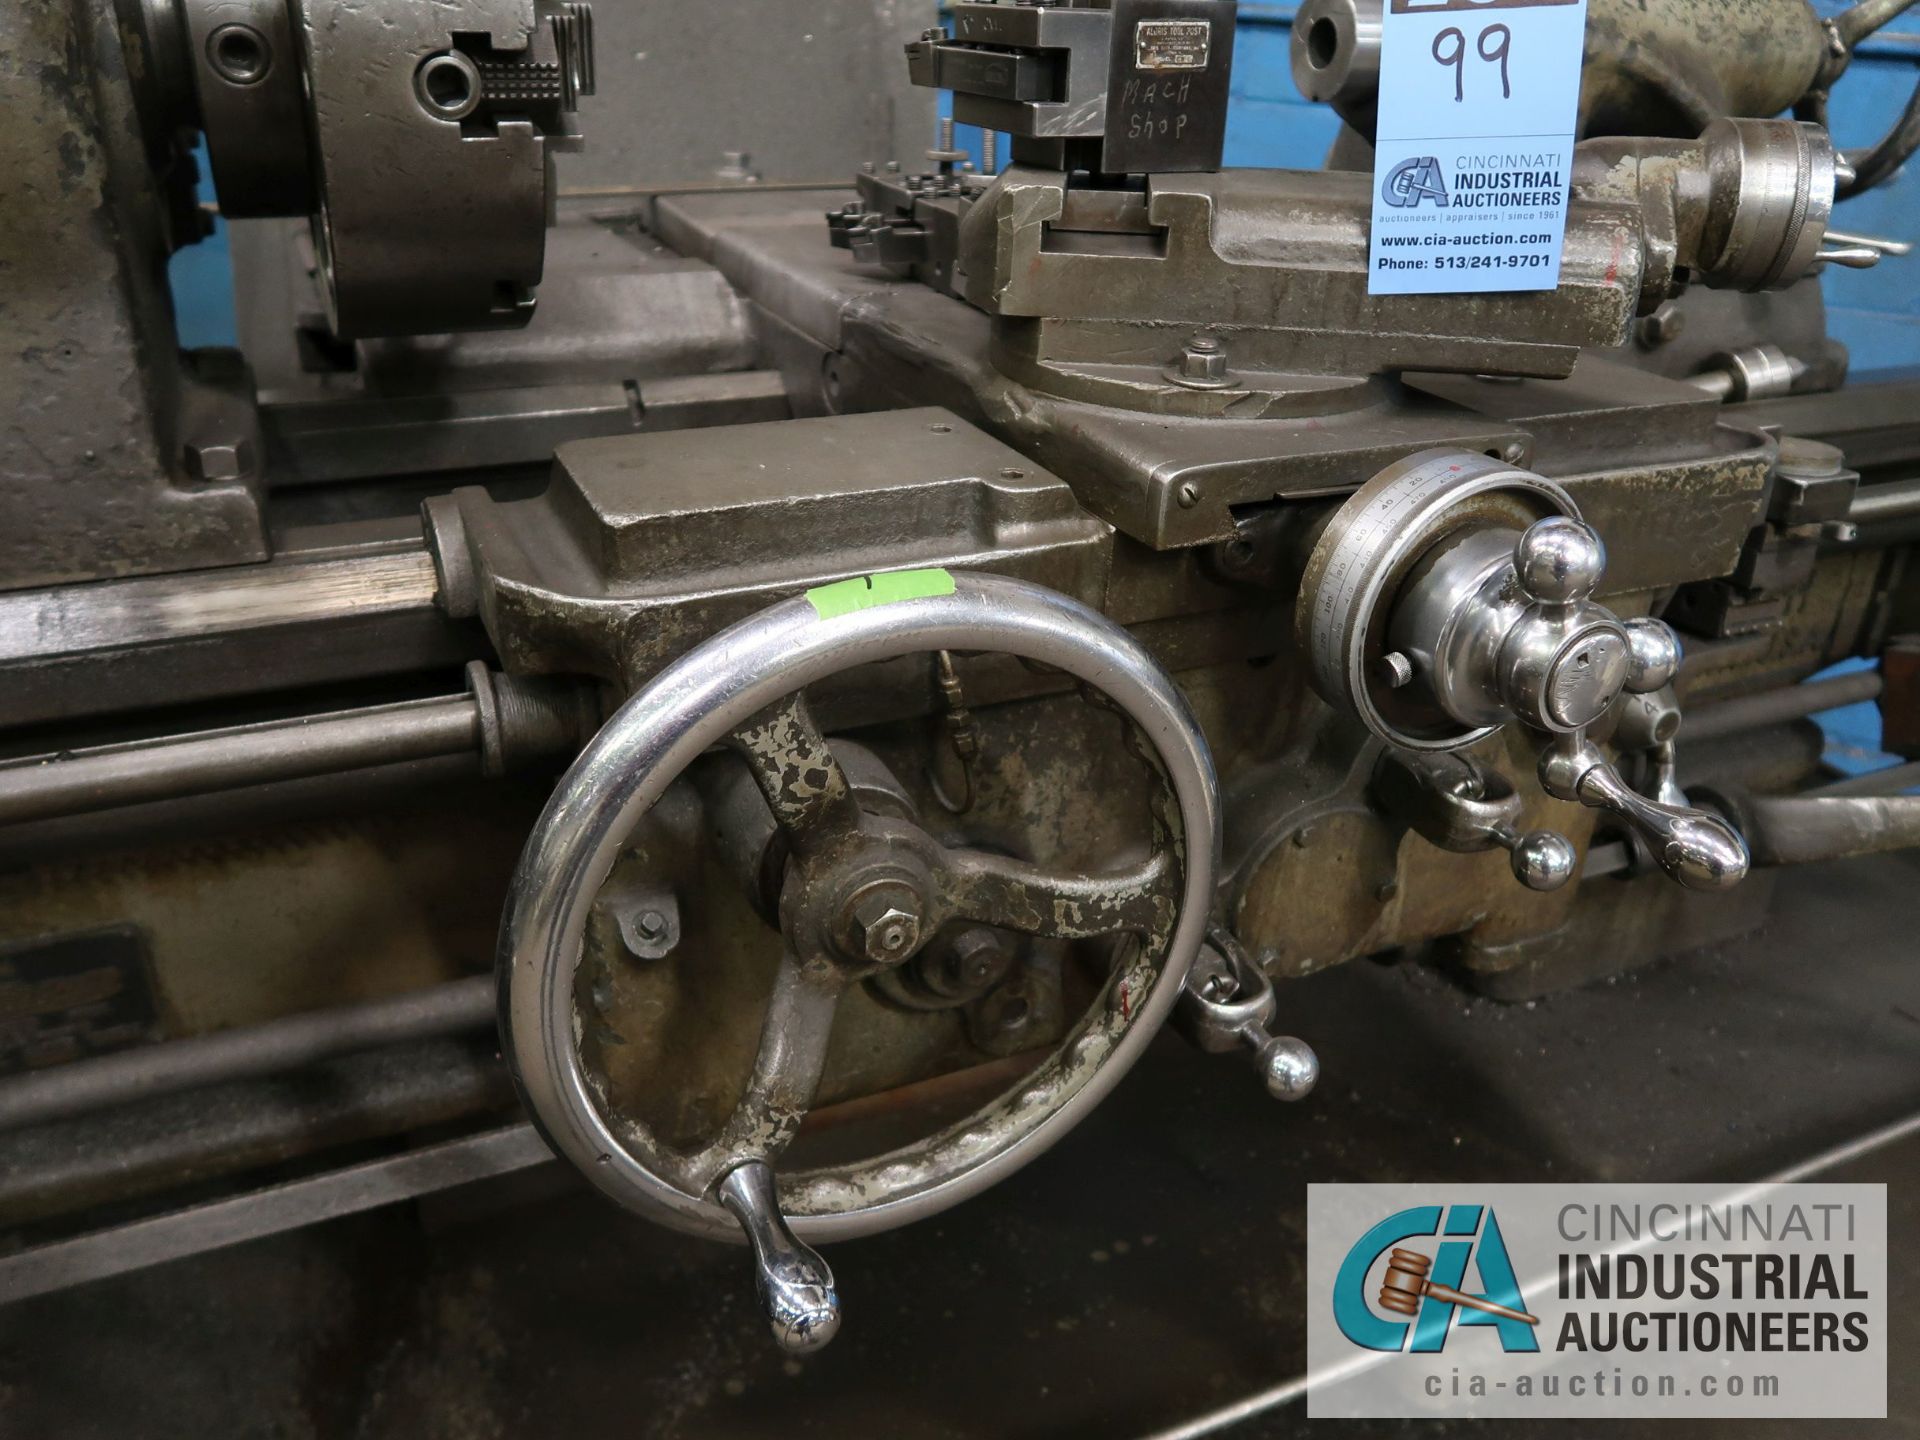 20" X 30" MONARCH MODEL CY LATHE; S/N CY16278K18-8, 12" 4-JAW CHUCK, 2" SPINDLE BORE, SPEEDS TO - Image 6 of 10